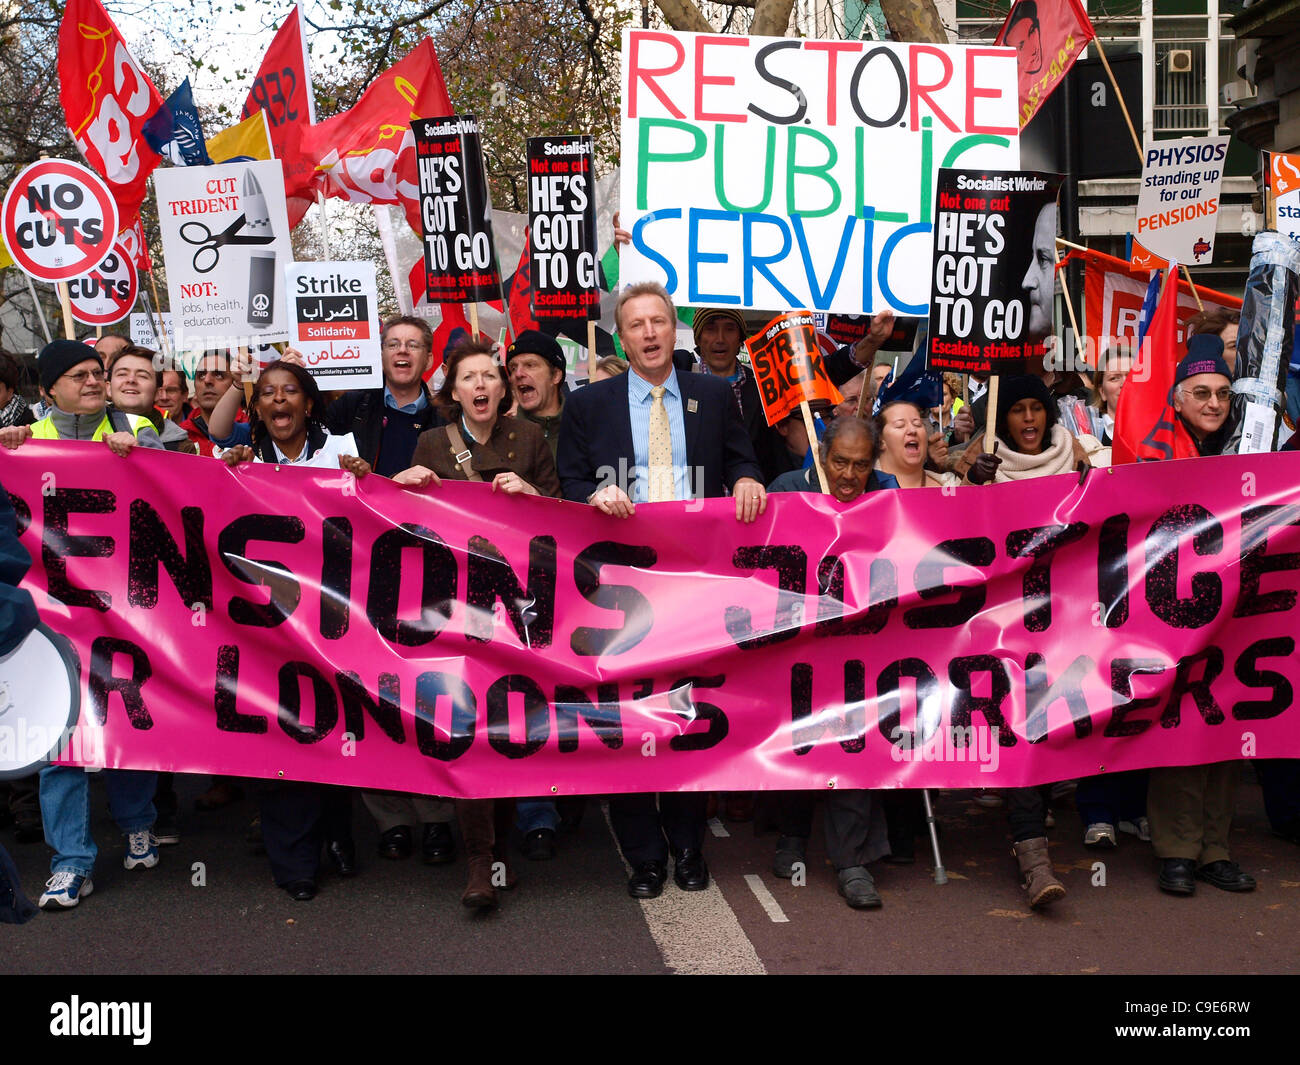 London, UK, 30/11/2011. Union leaders and public sector workers march at the main demonstration in London against cuts to pensions.  An estimated two million public sector workers went on strike across the UK in protest at the governments changes to public sector pensions. Stock Photo